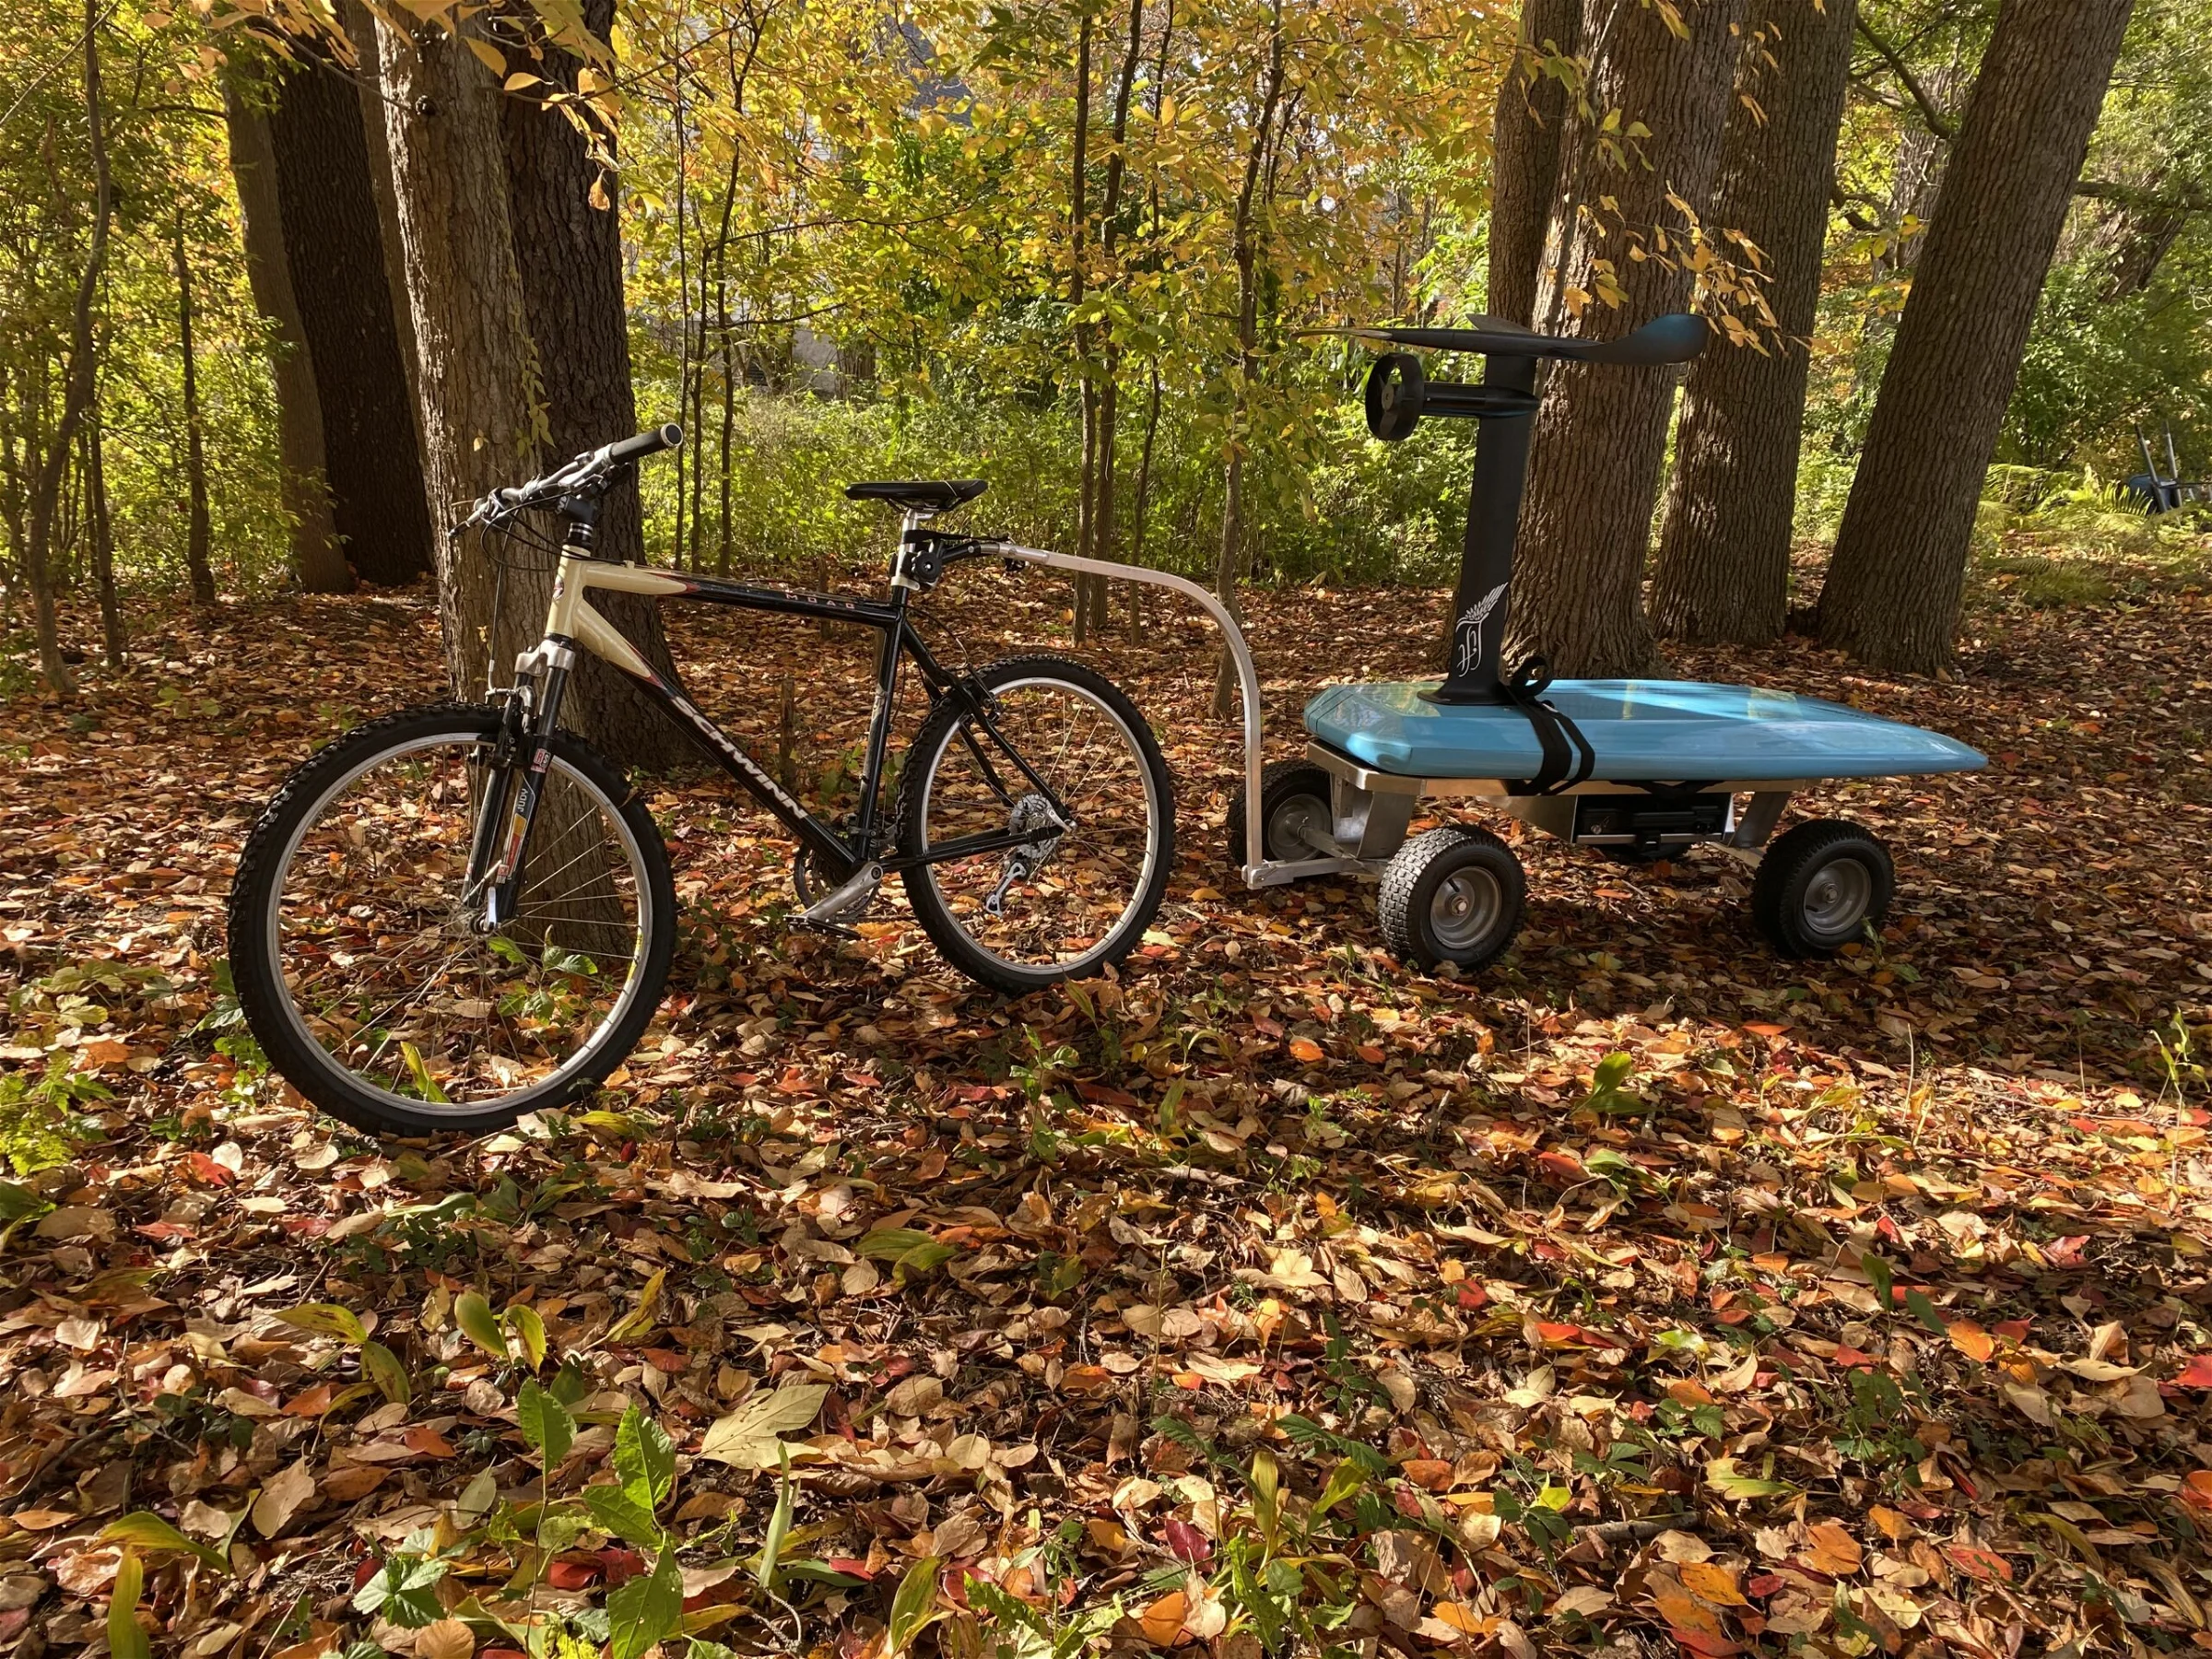 A bike with a wagon attached using the bike attachment accessory from Kahuna Wagons, in the woods surrounded by leaves.